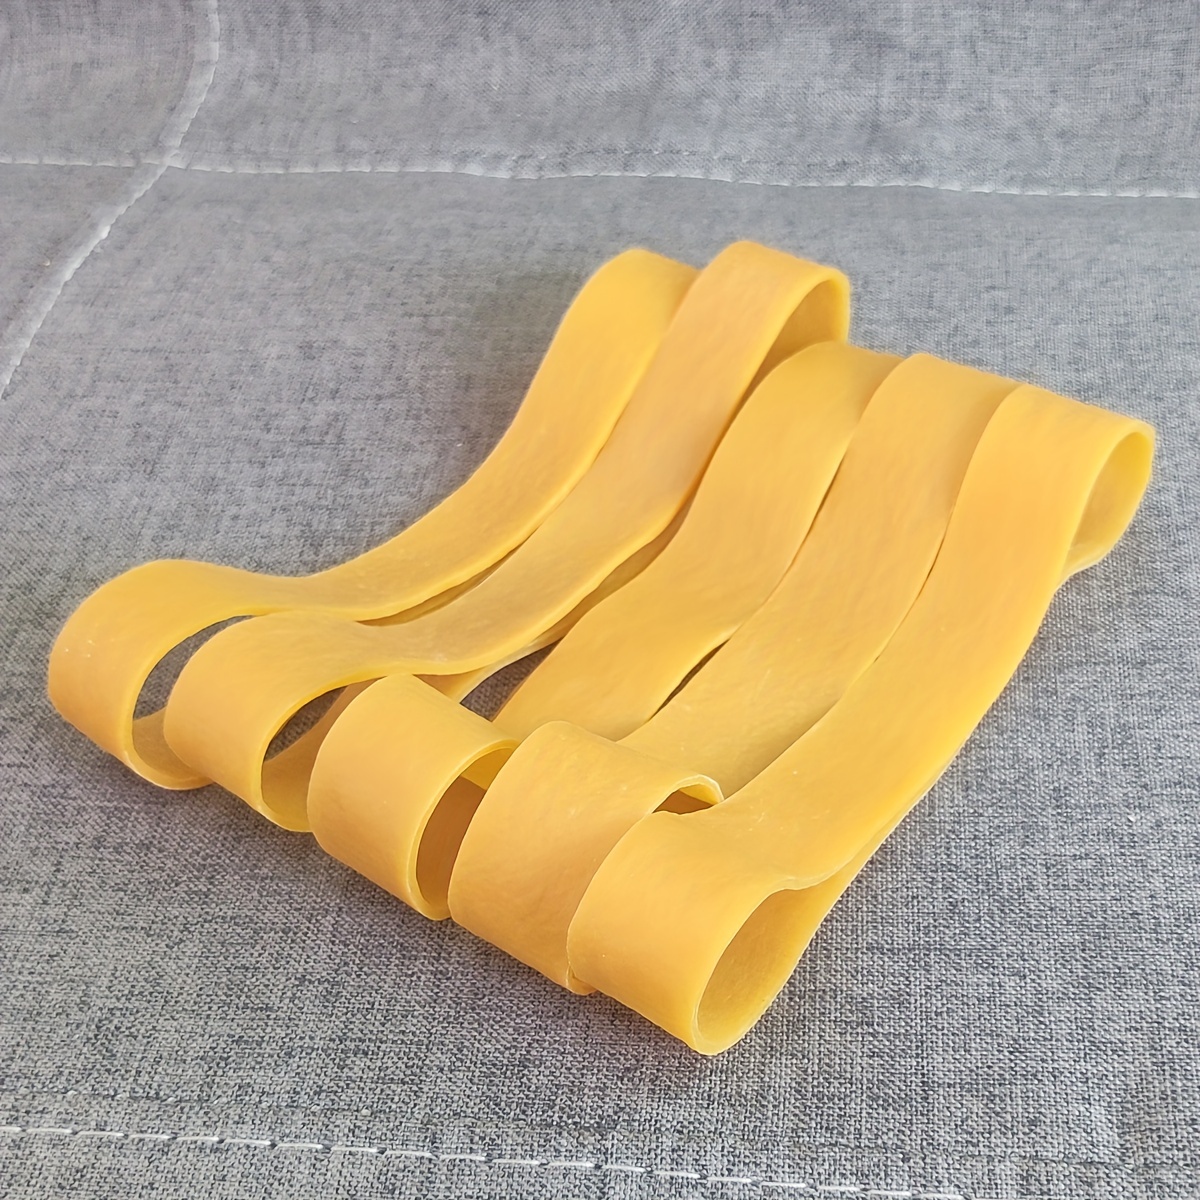 F Fityle 1 Bag 25mm Diameter Rubber Bands Fish Bag Bands Large Elastic Bands for Office and Home Supplies ( Yellow ) Thin, Size: As described